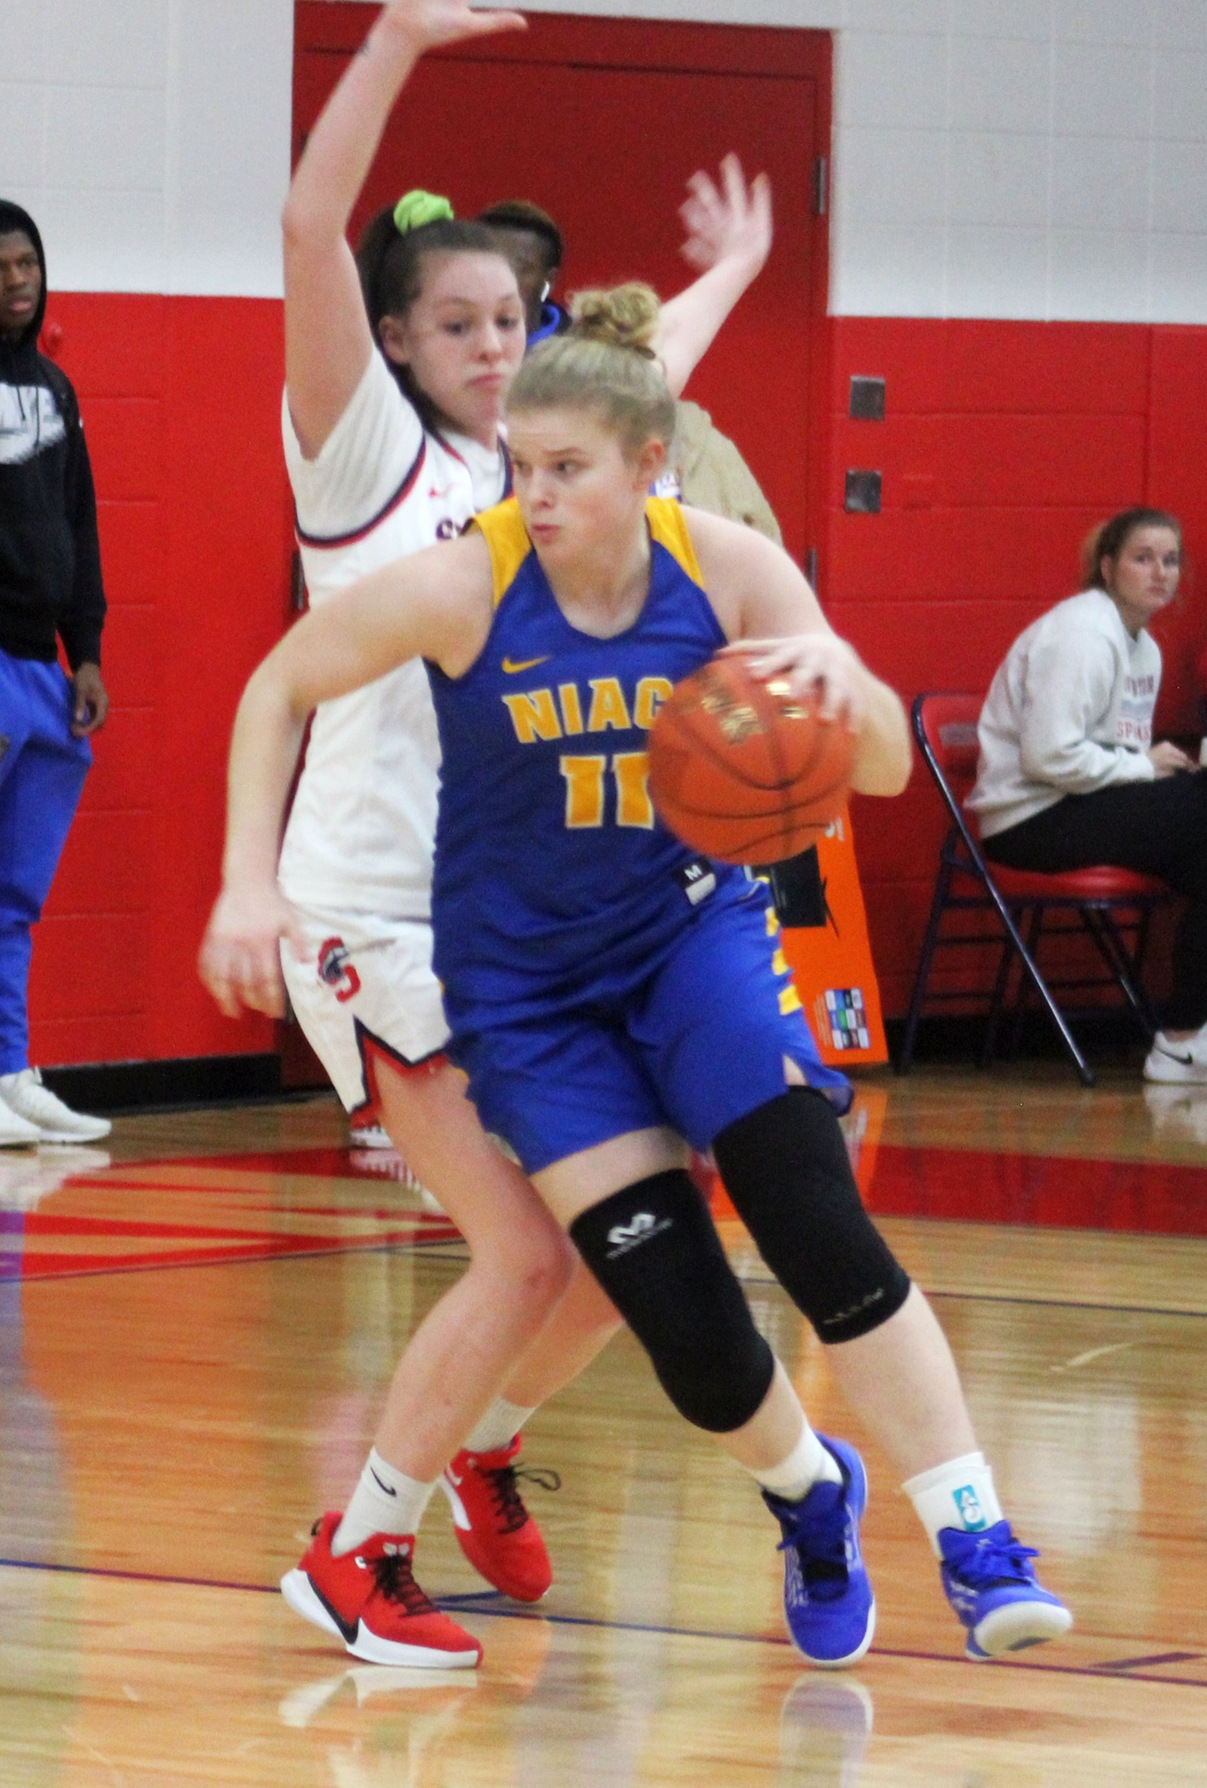 NIACC's Allie Negen drives to the basket against Southwestern on Dec. 4.